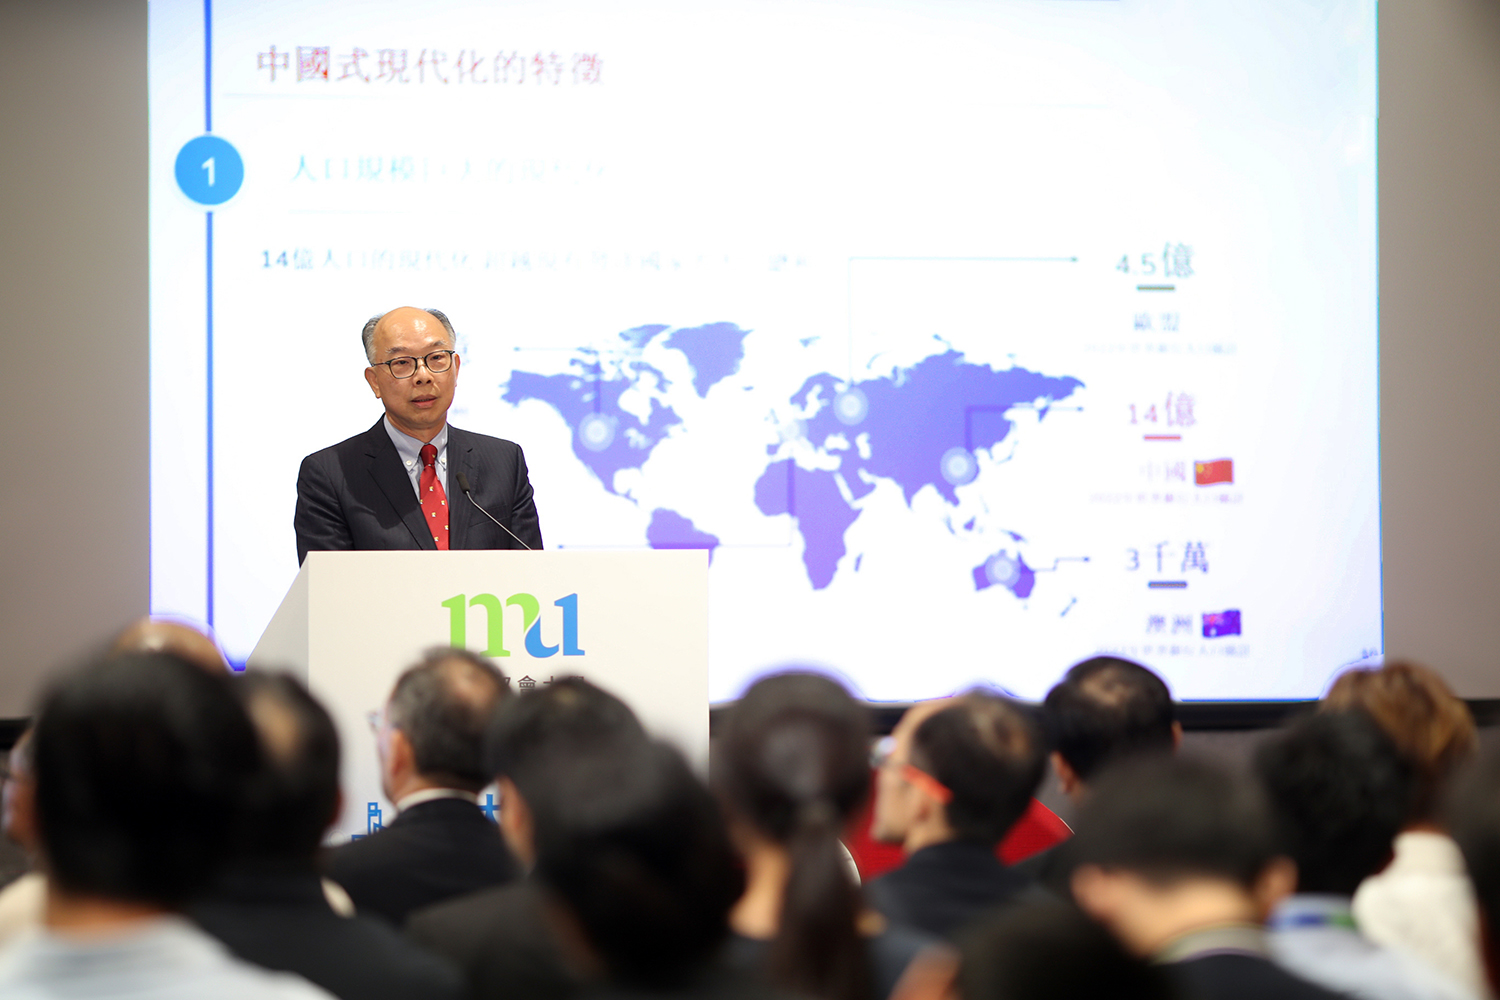 Ir Prof. Frank Chan Fan, Hong Kong Deputy to the National People’s Congress and Vice President of the Hong Kong Institution of Engineers, elaborates on the features of Chinese modernisation.